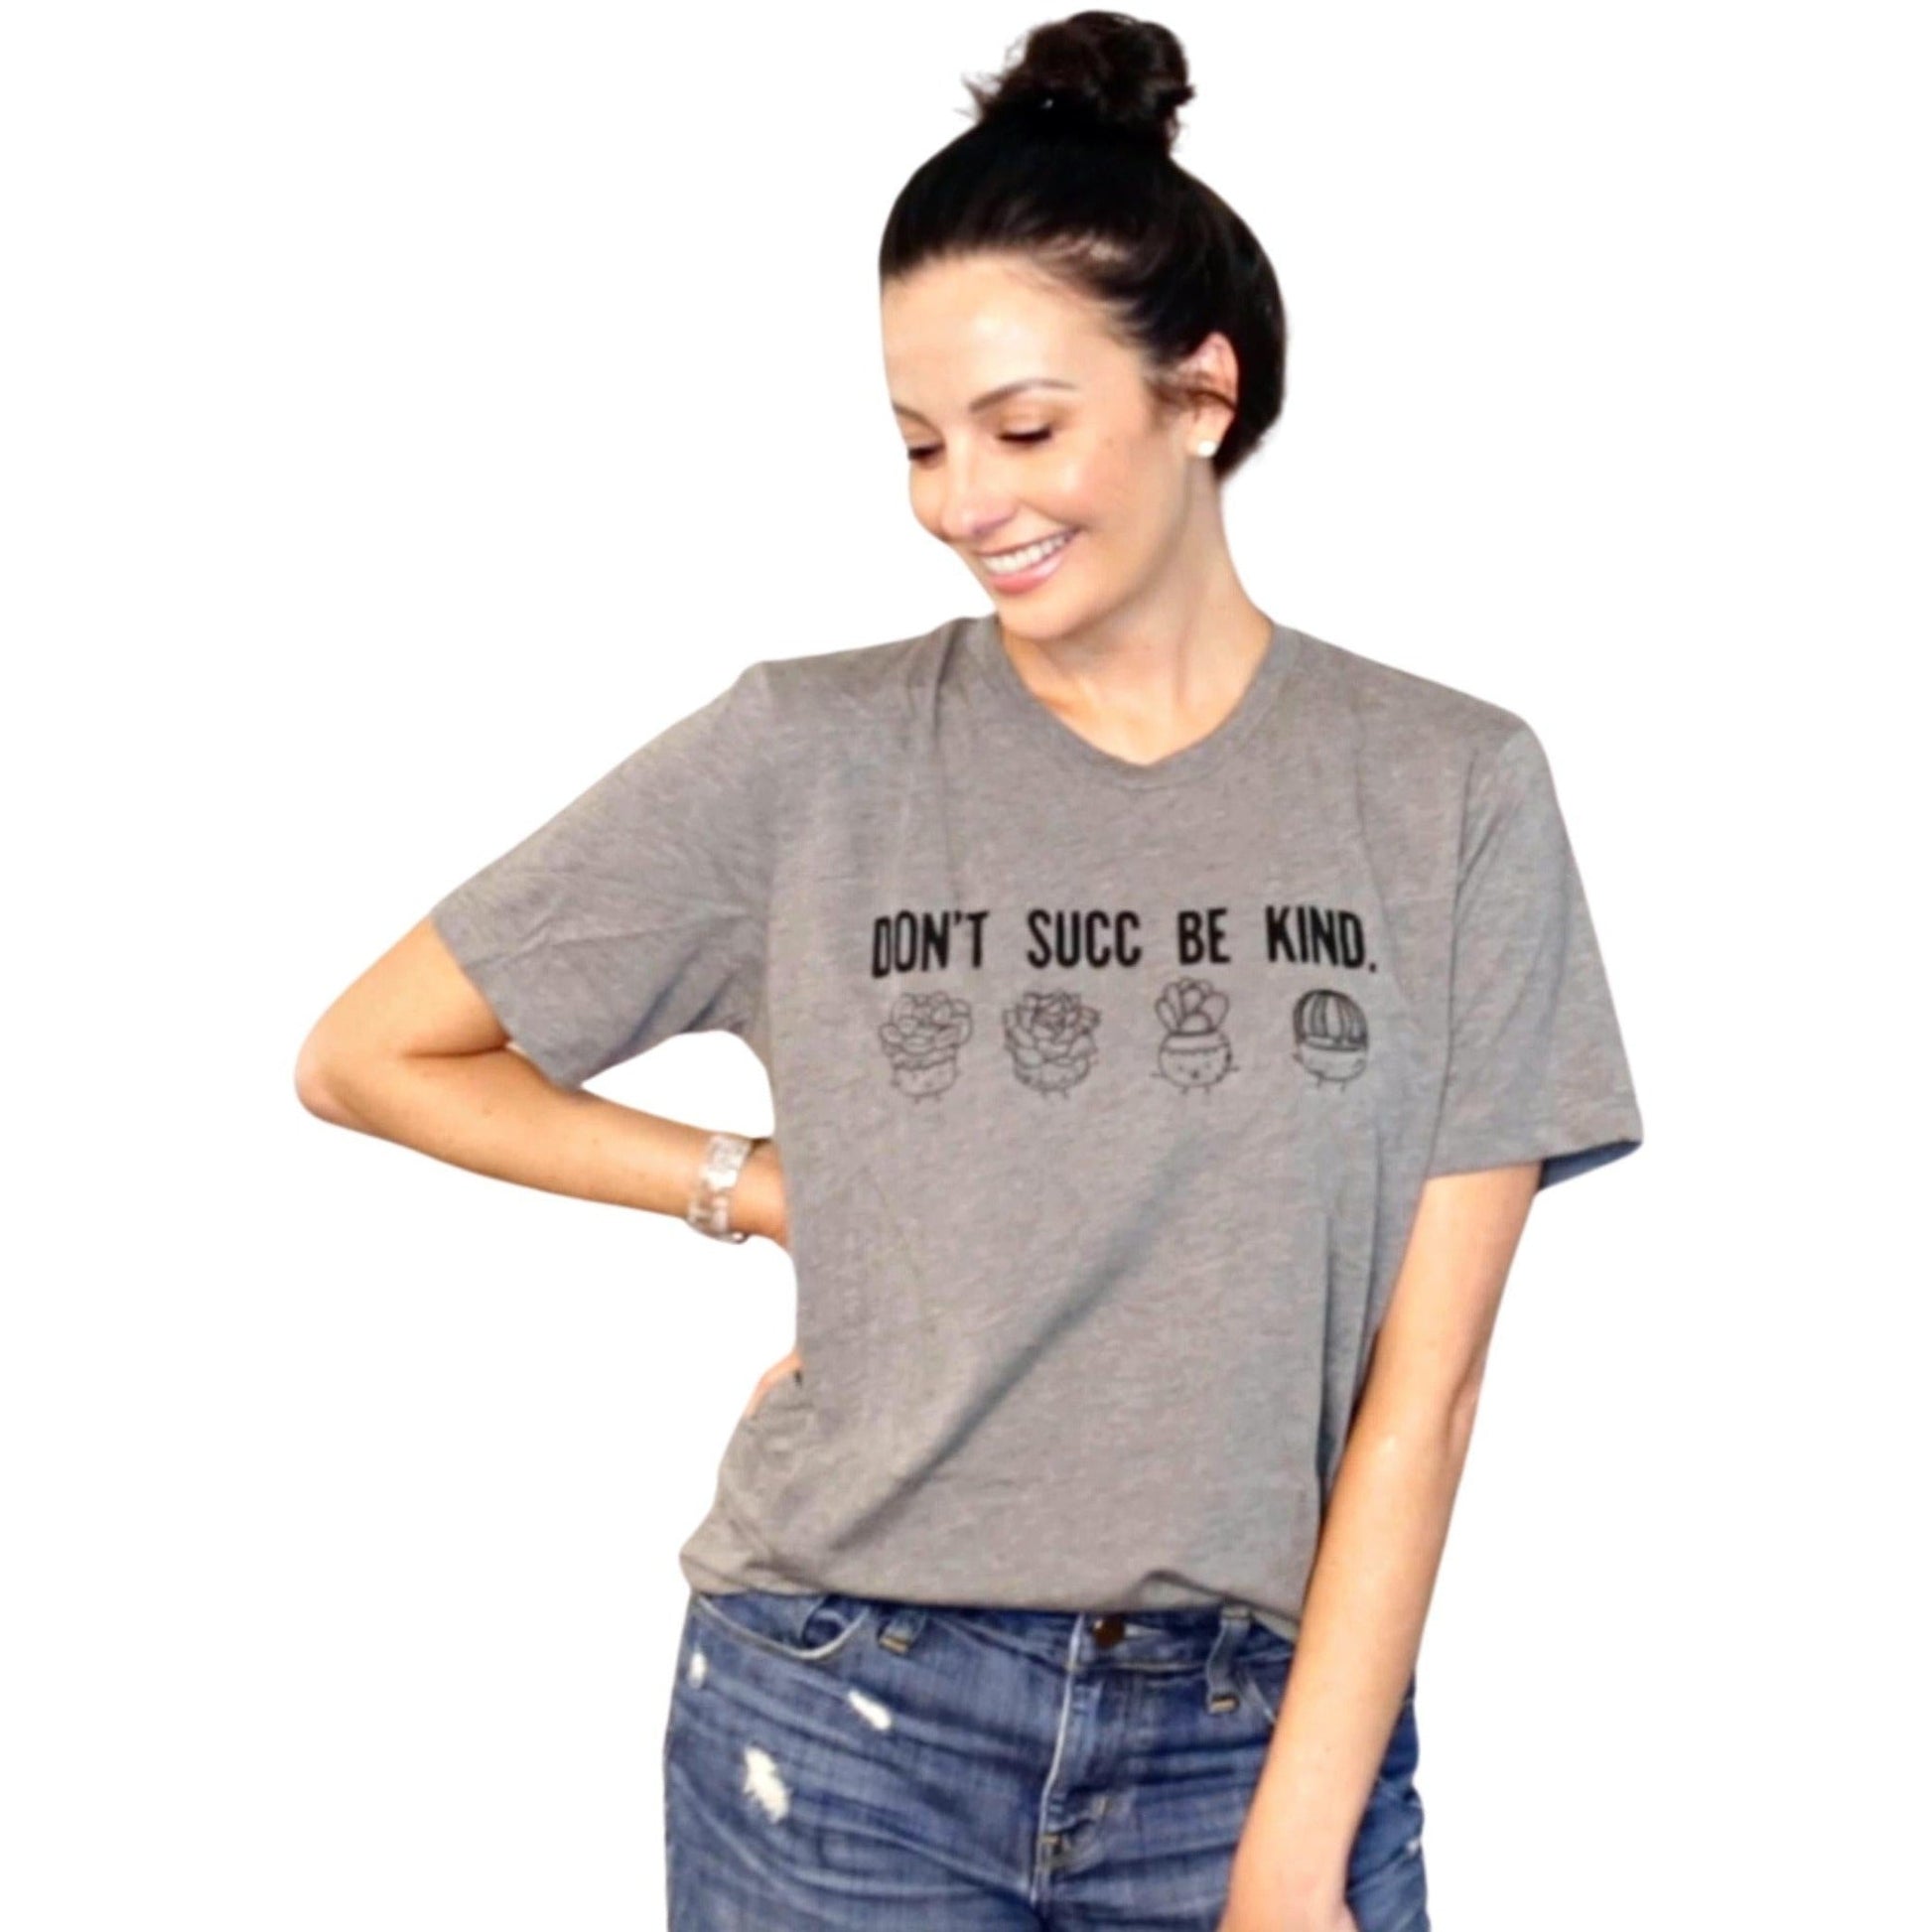 2. Don't Succ Be Kind - Stories You Can Wear by Thread Tank